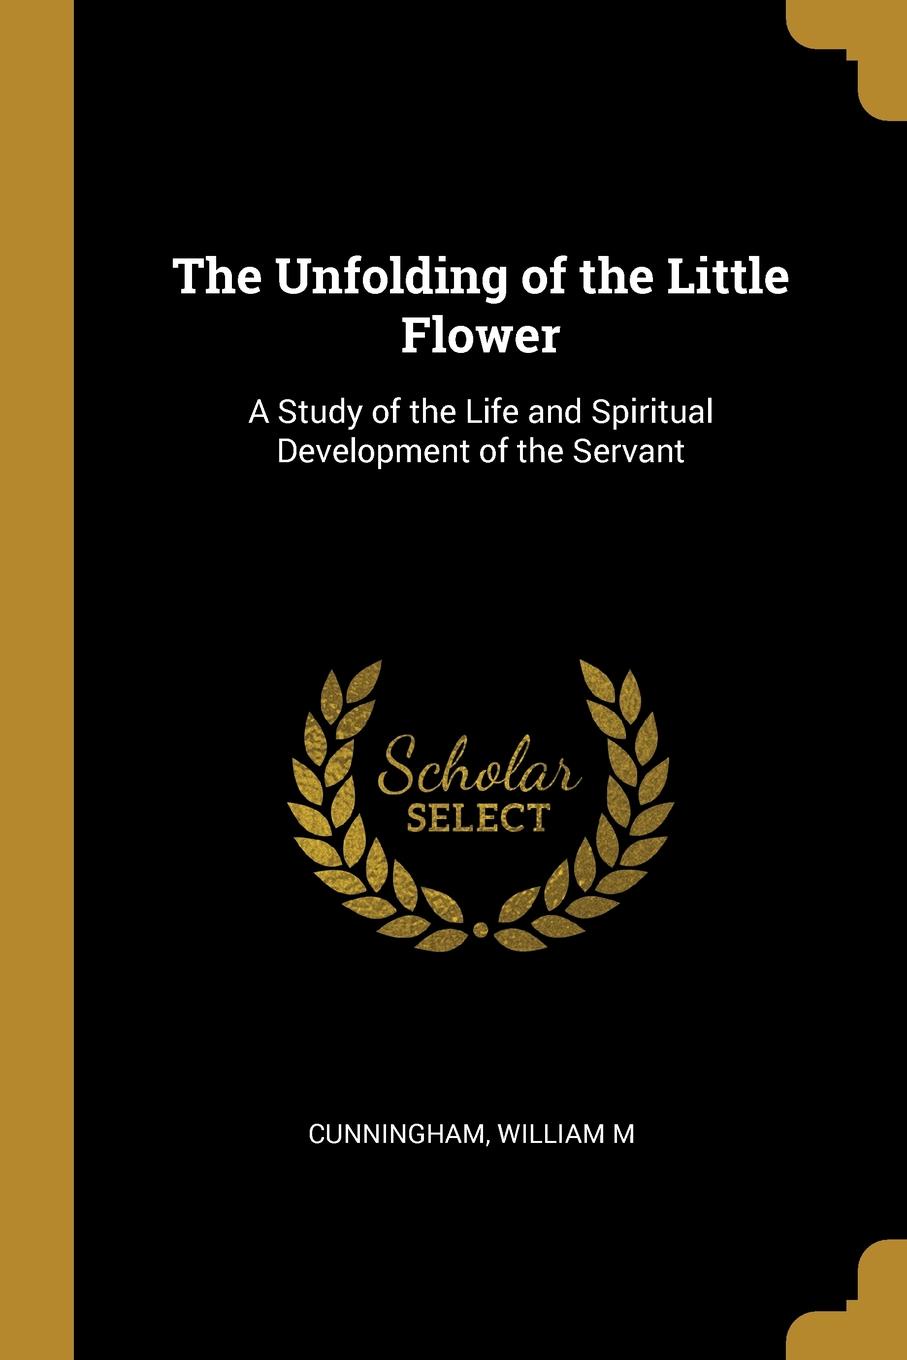 The Unfolding of the Little Flower. A Study of the Life and Spiritual Development of the Servant